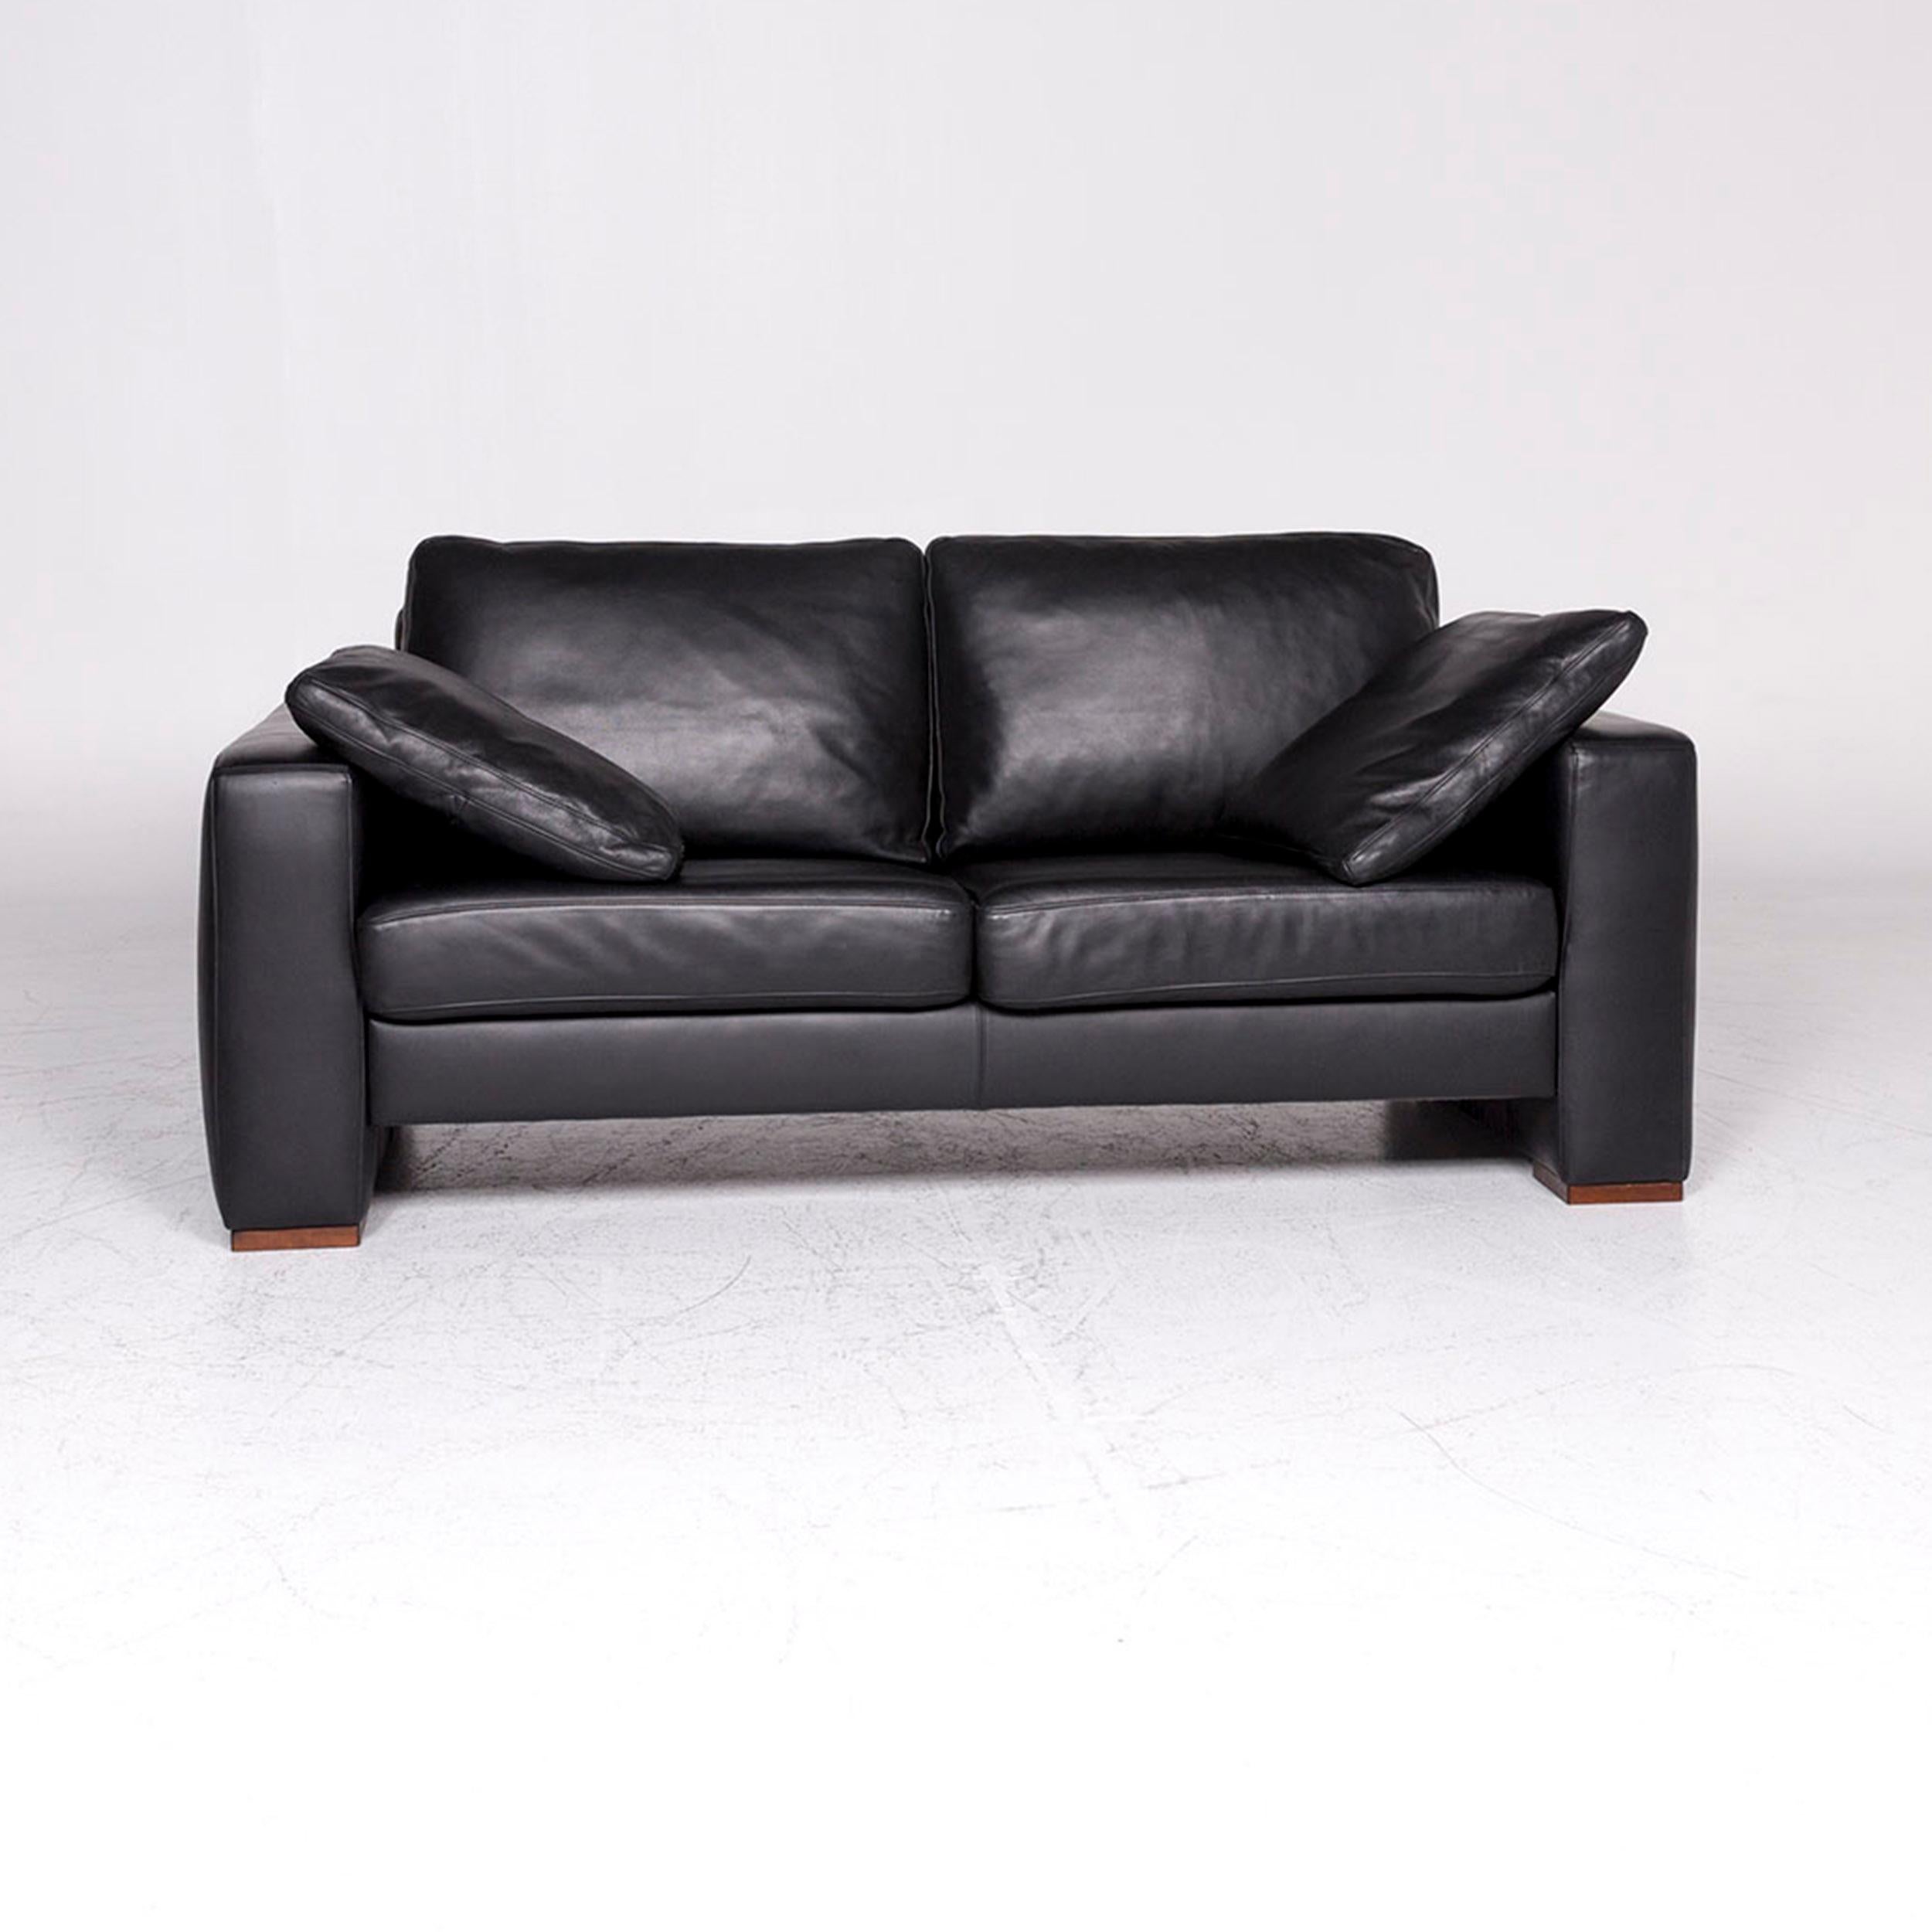 Modern Machalke Designer Leather Sofa Black Two-Seat Couch For Sale